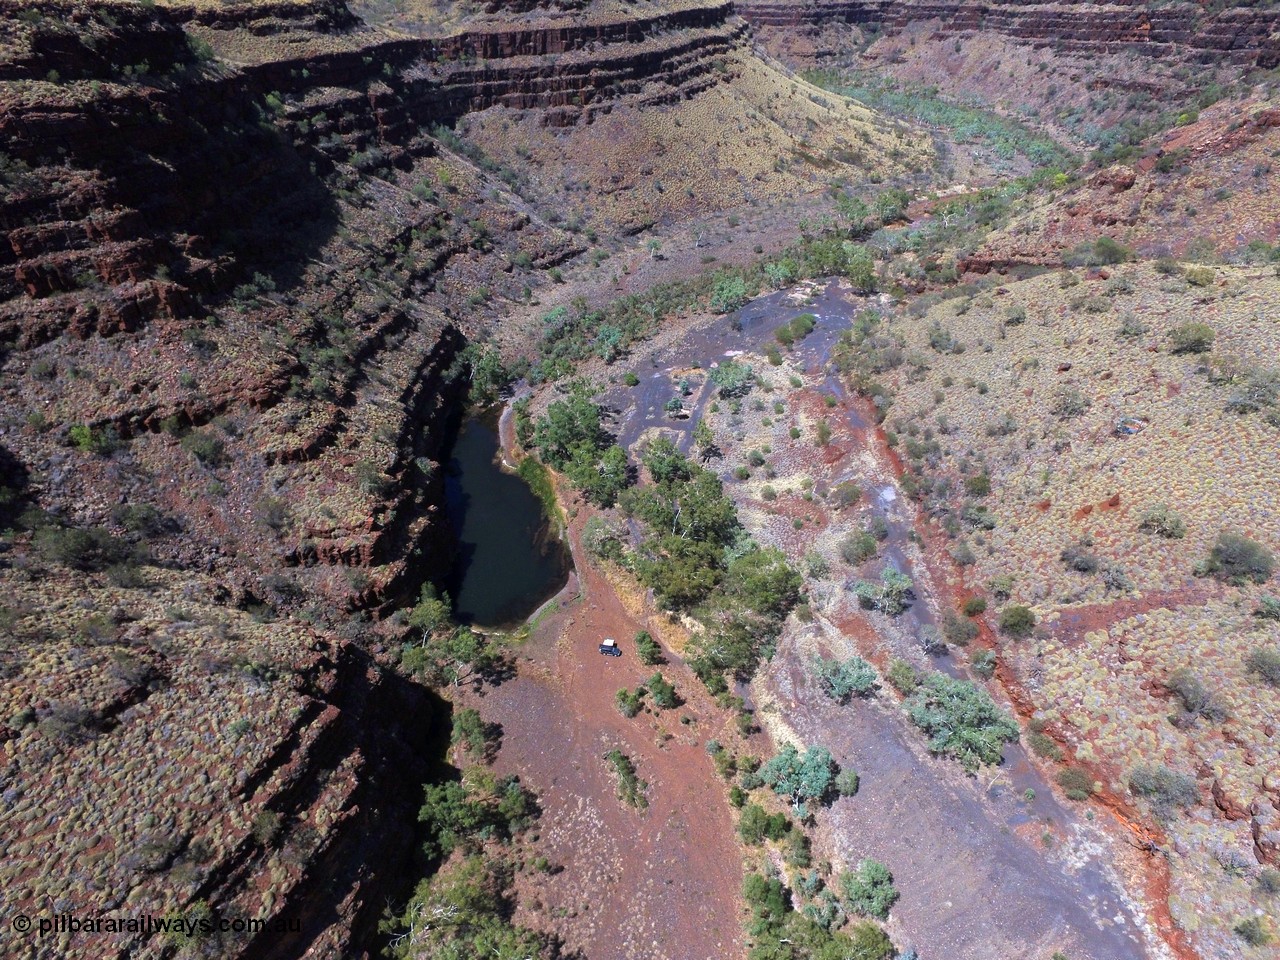 160101 DJI 0013
Wittenoom Gorge, view from above the Gorge Mine area and pool, looking south west, campers at pool, the track continues on for a little further than here, and then foot access can be gained into gorge in Karijini National Park. [url=https://goo.gl/maps/gL4iyihuq5BNSAWS9]Geodata[/url].
